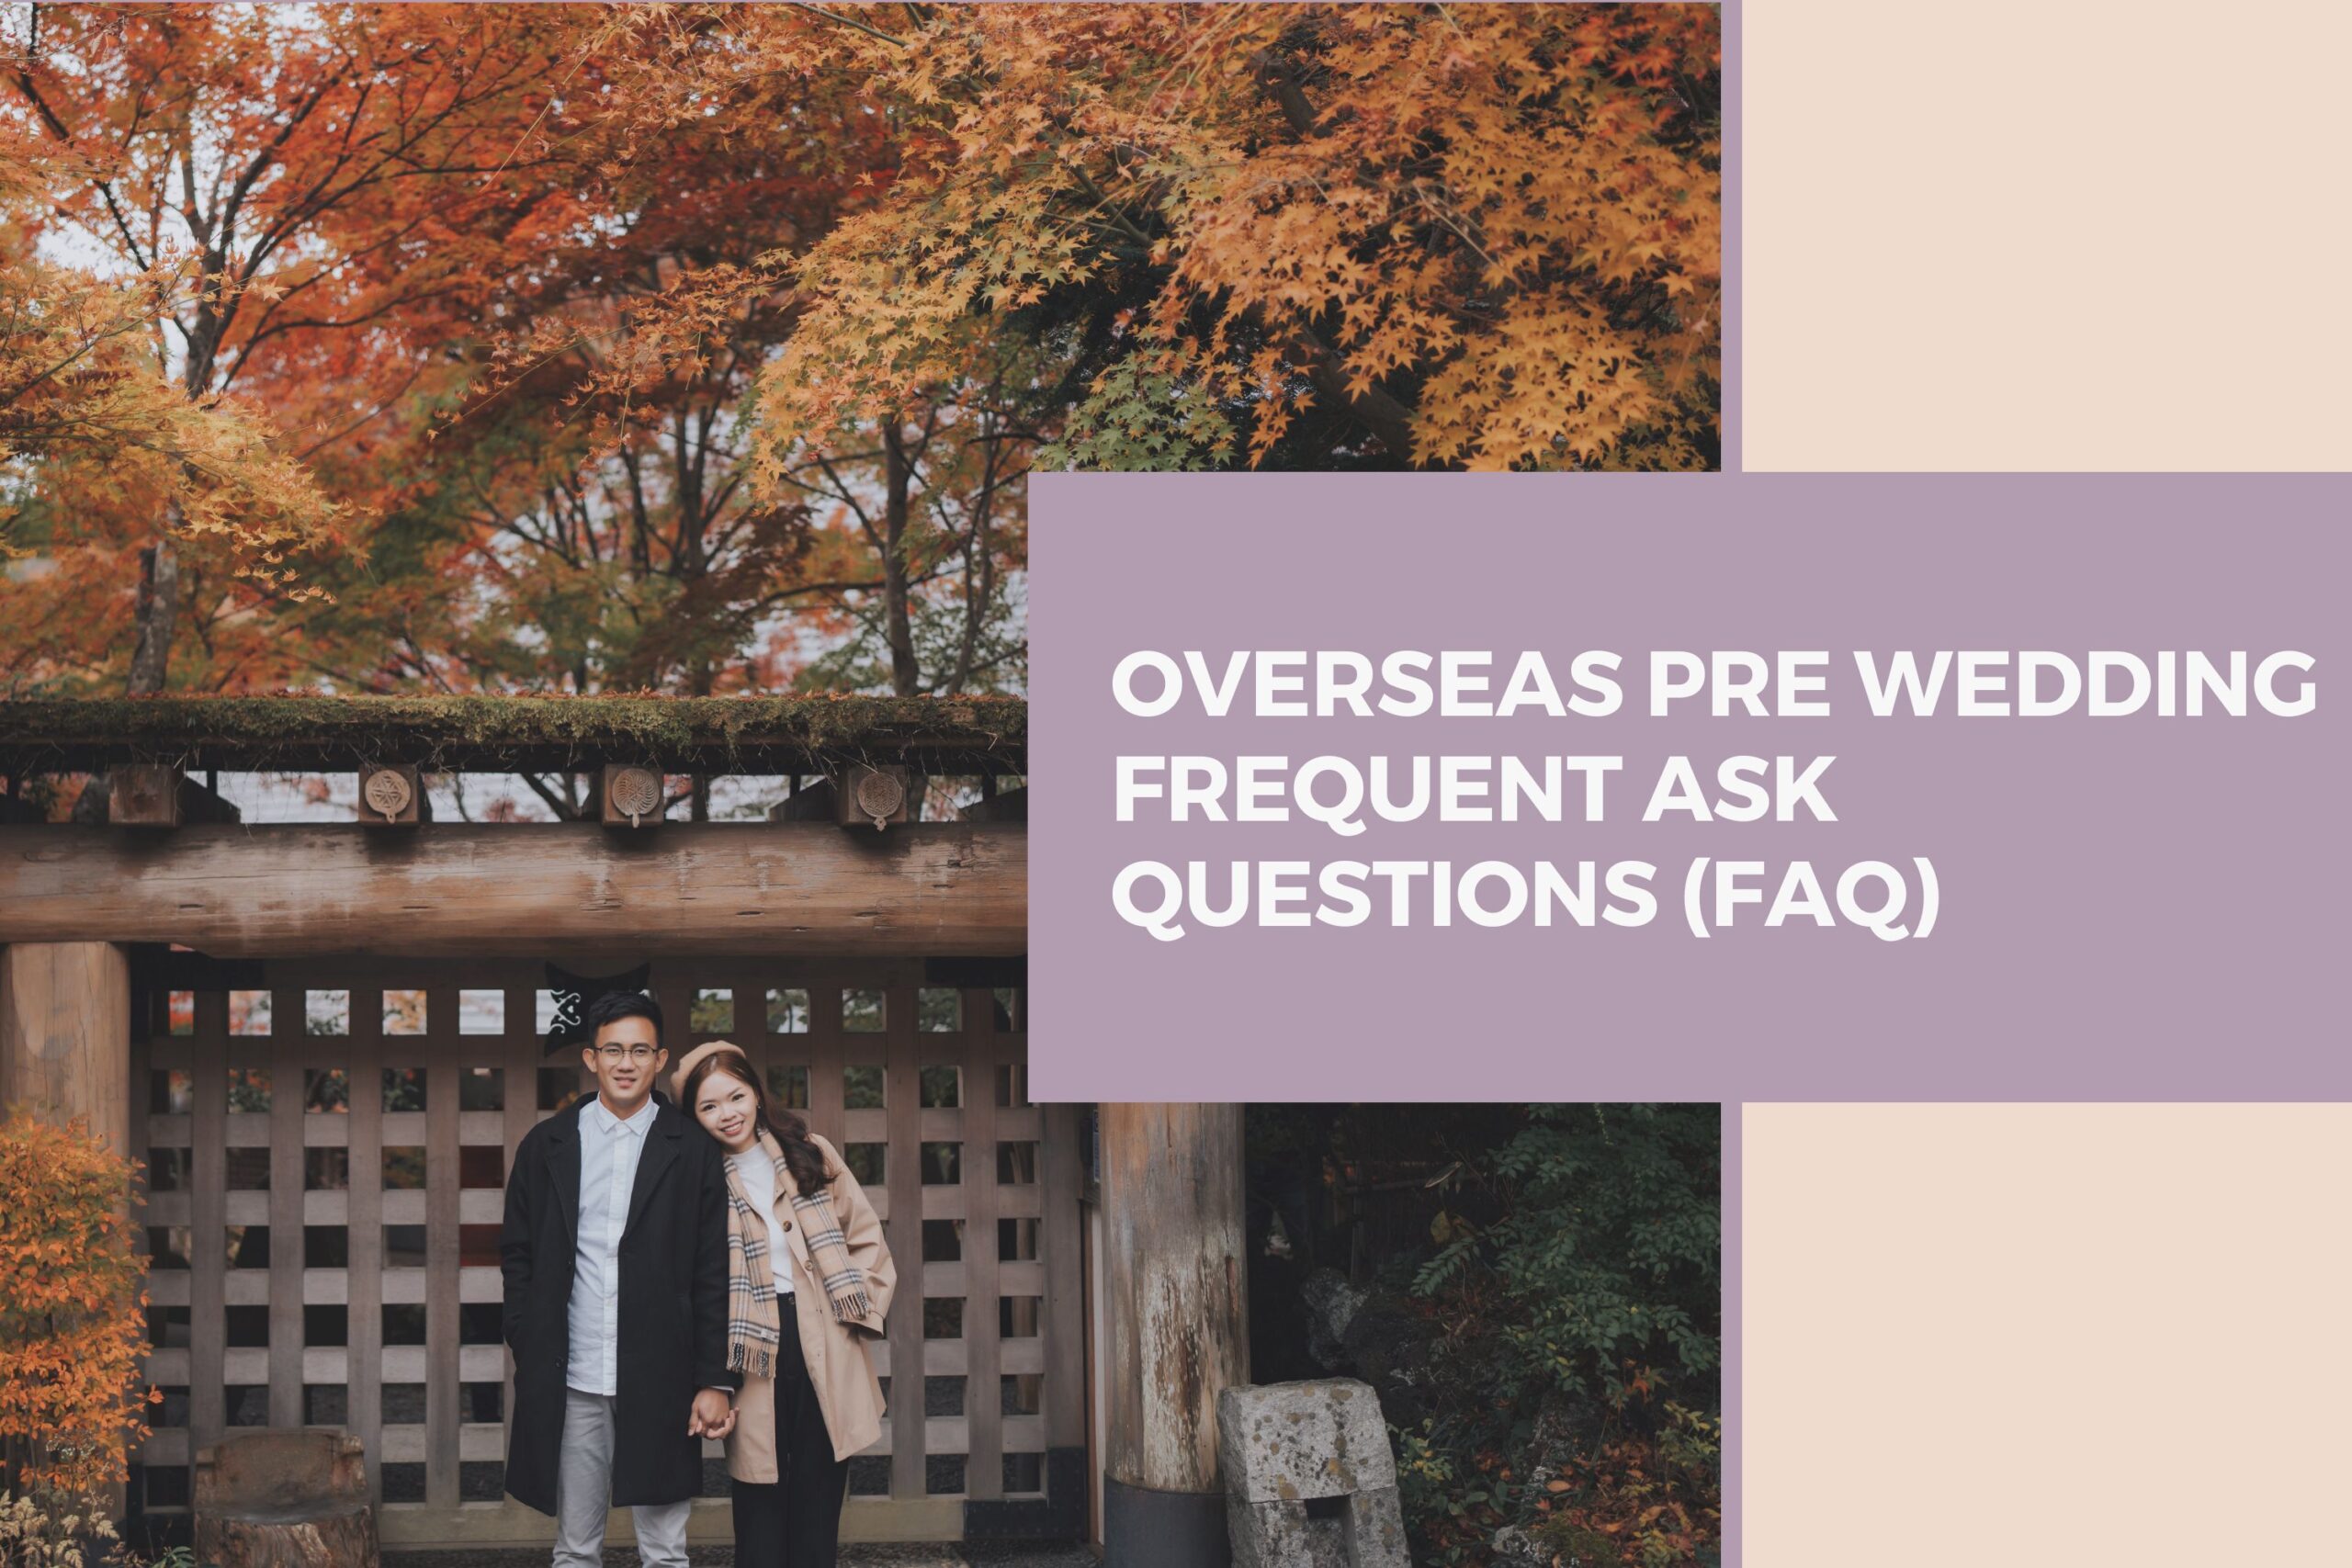 Overseas Pre Wedding Frequent Ask Questions (FAQ)